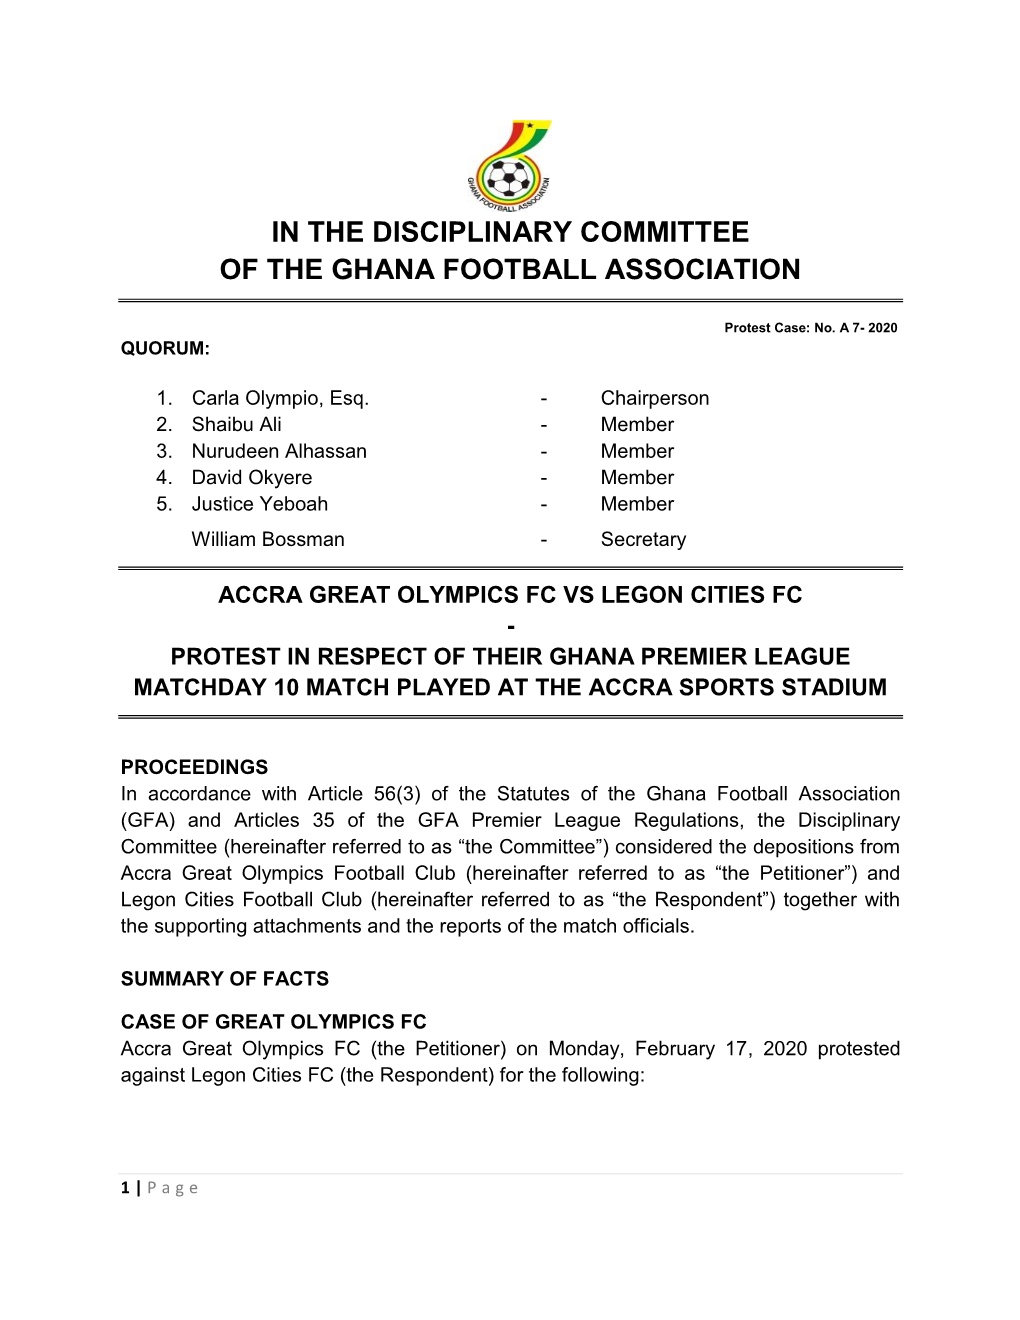 In the Disciplinary Committee of the Ghana Football Association